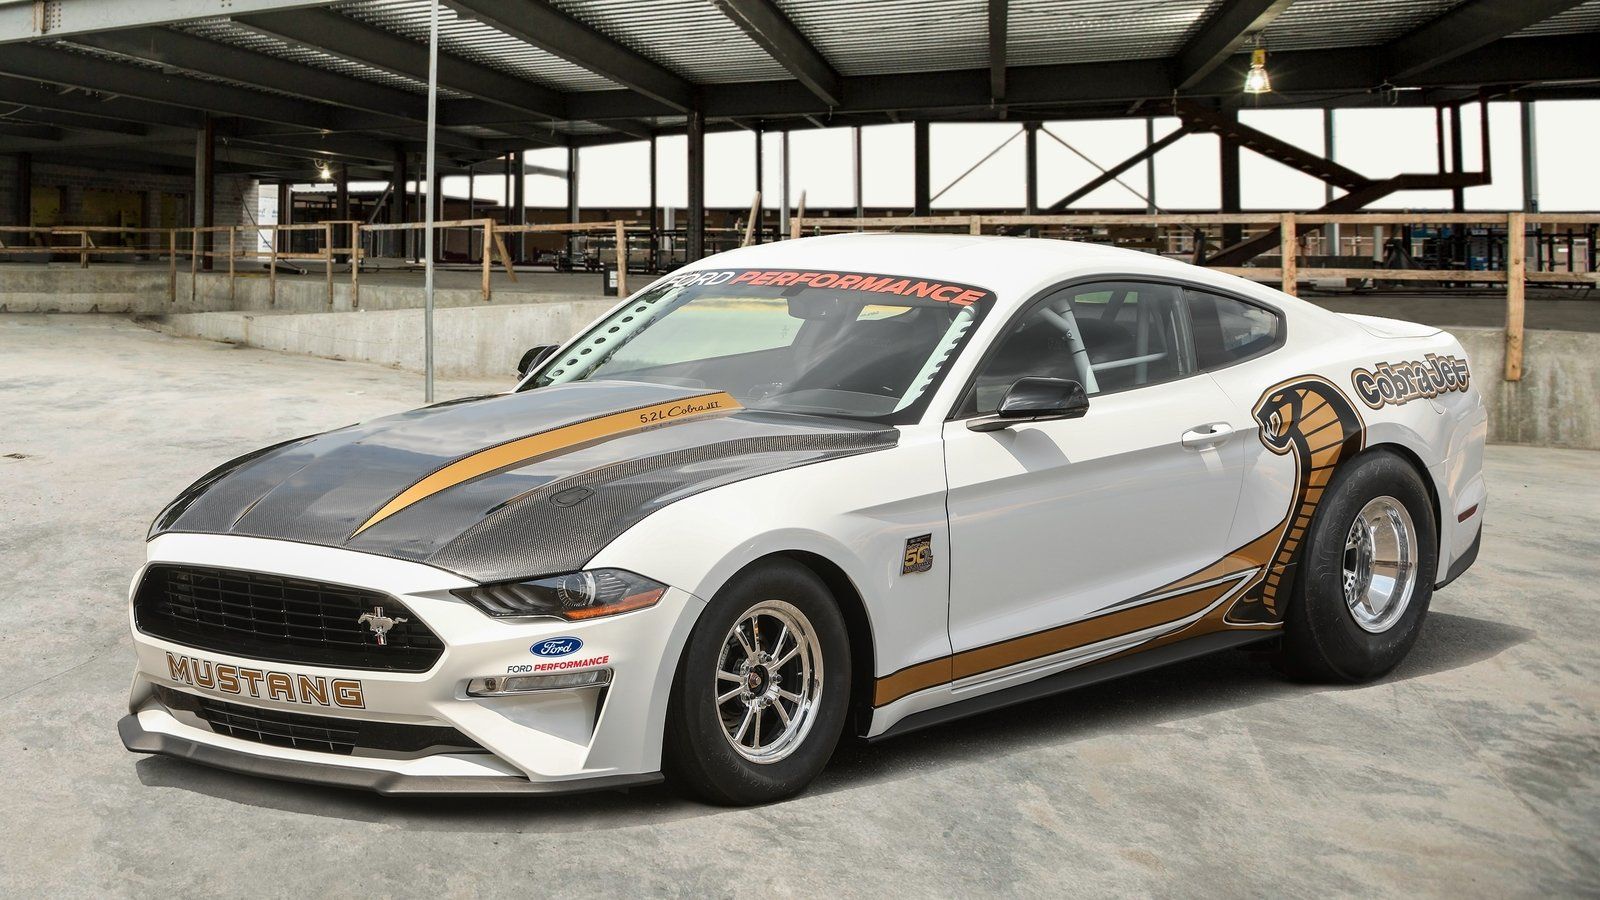 Forget About The Shelby GT Ford Just Unveiled The Fastest Drag Mustang In History Picture, Photo, Wallpaper